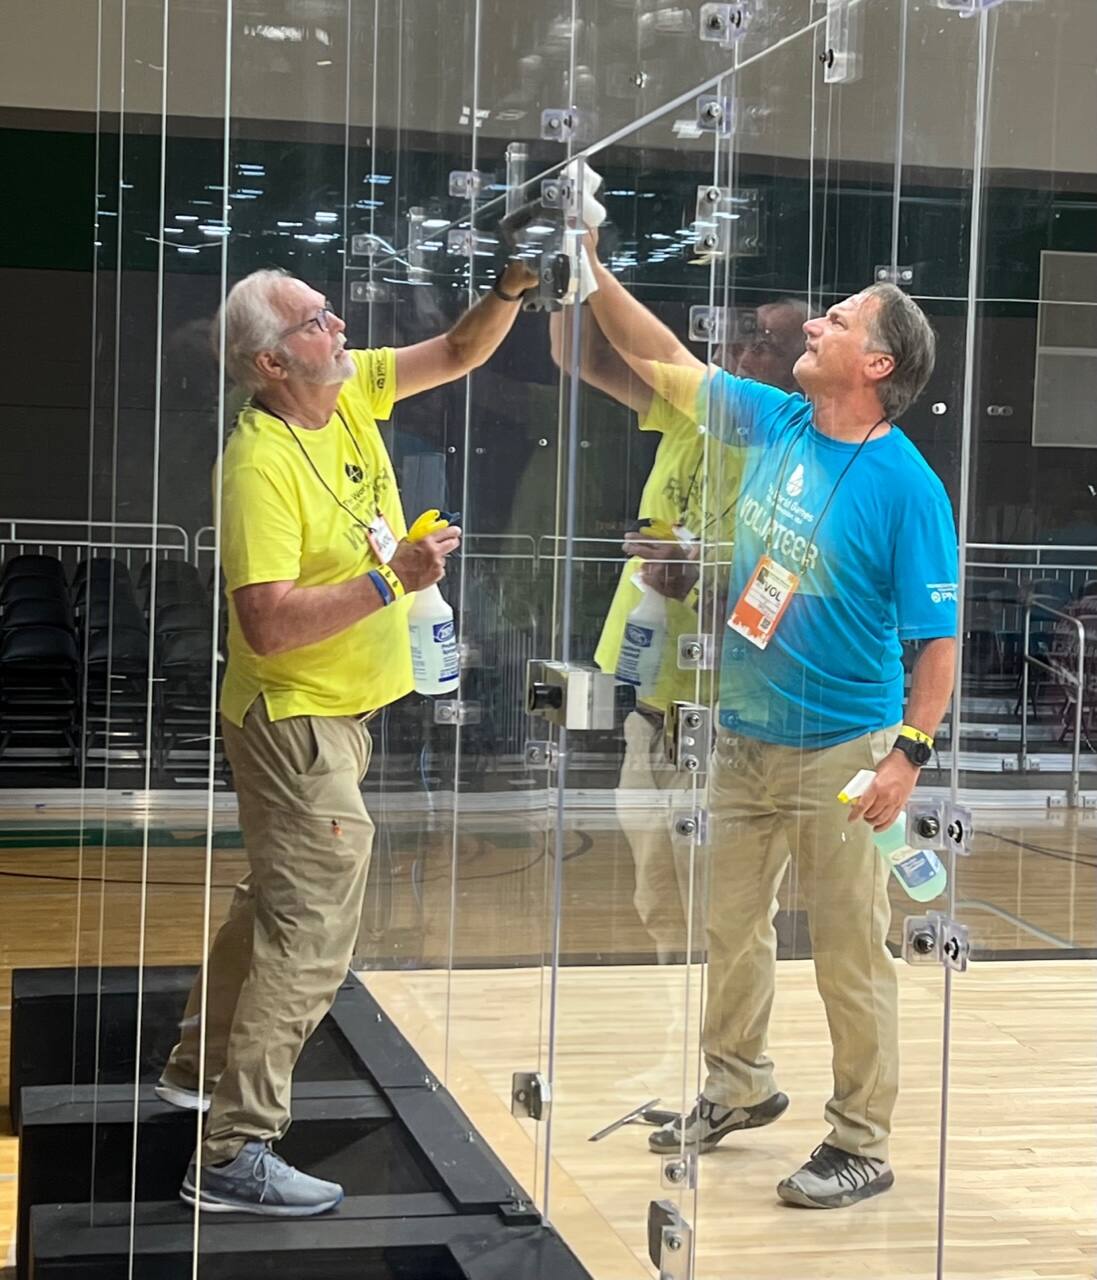 World Games Cleaning Crew David Shea and David Graves